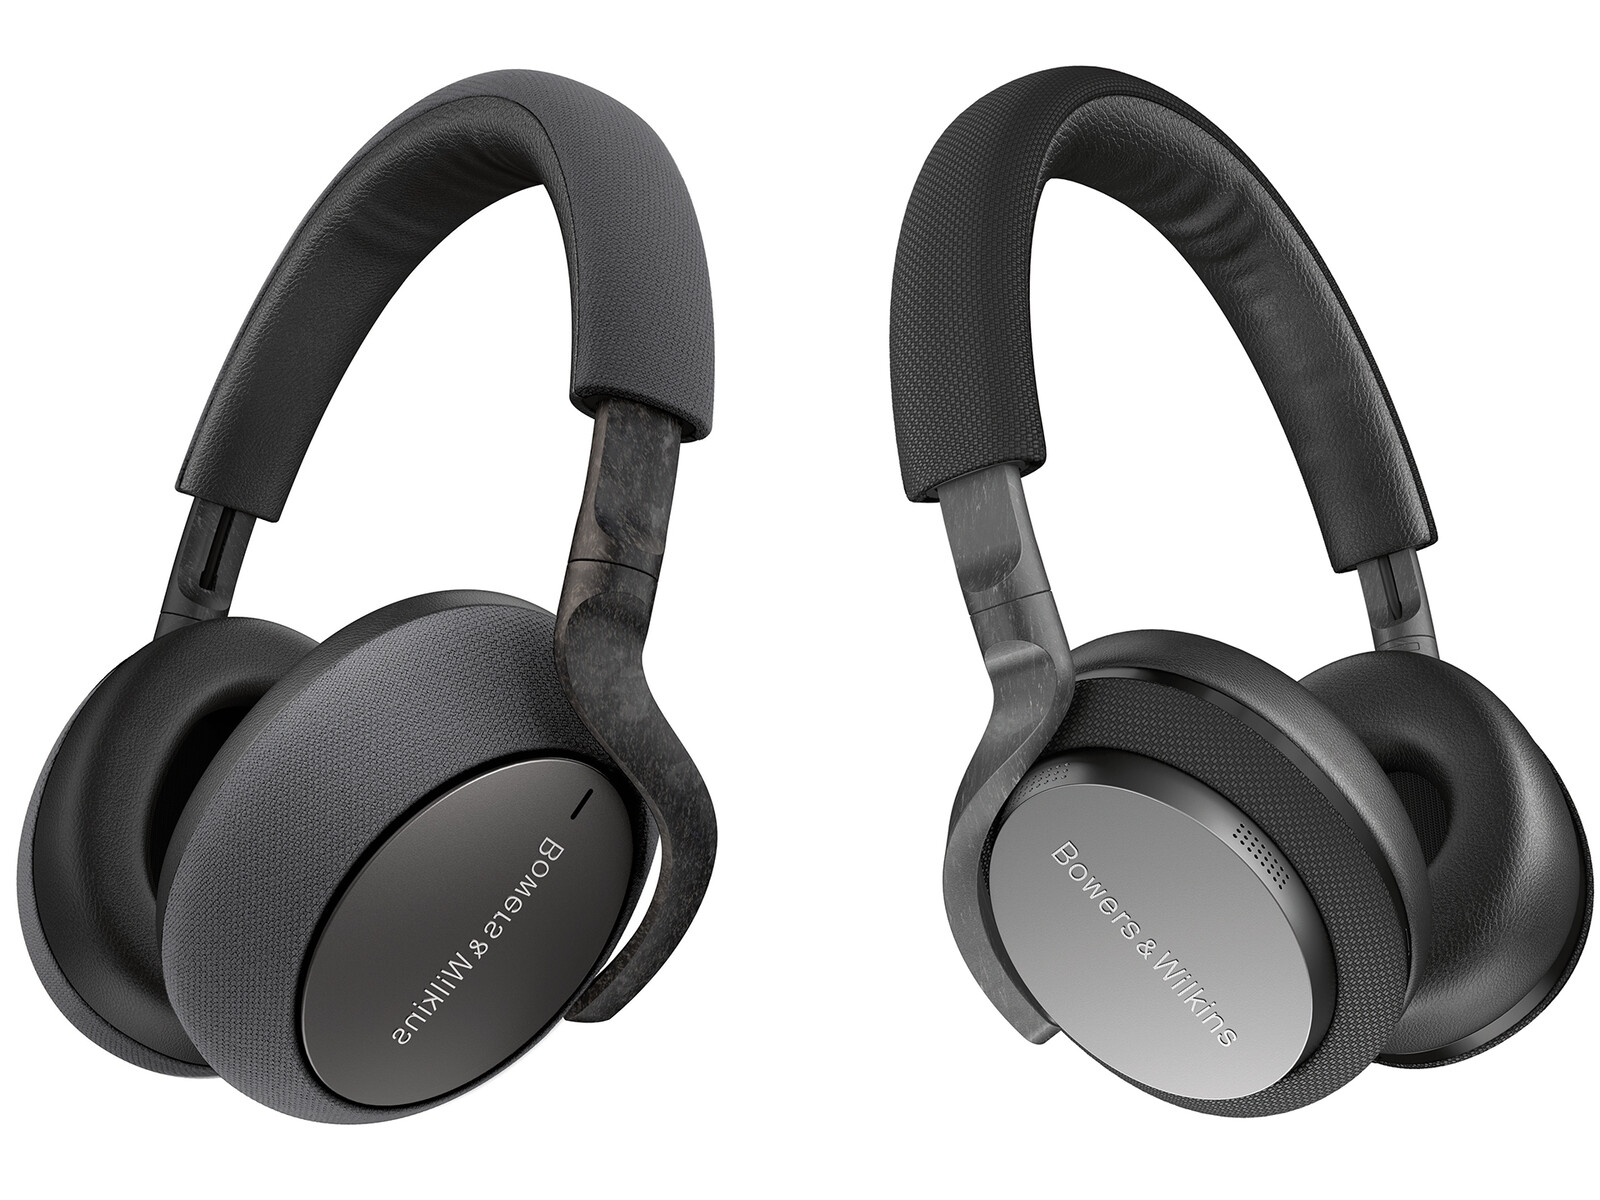 Bowers & Wilkins PX7 and PX5 in the double test - Premium sound